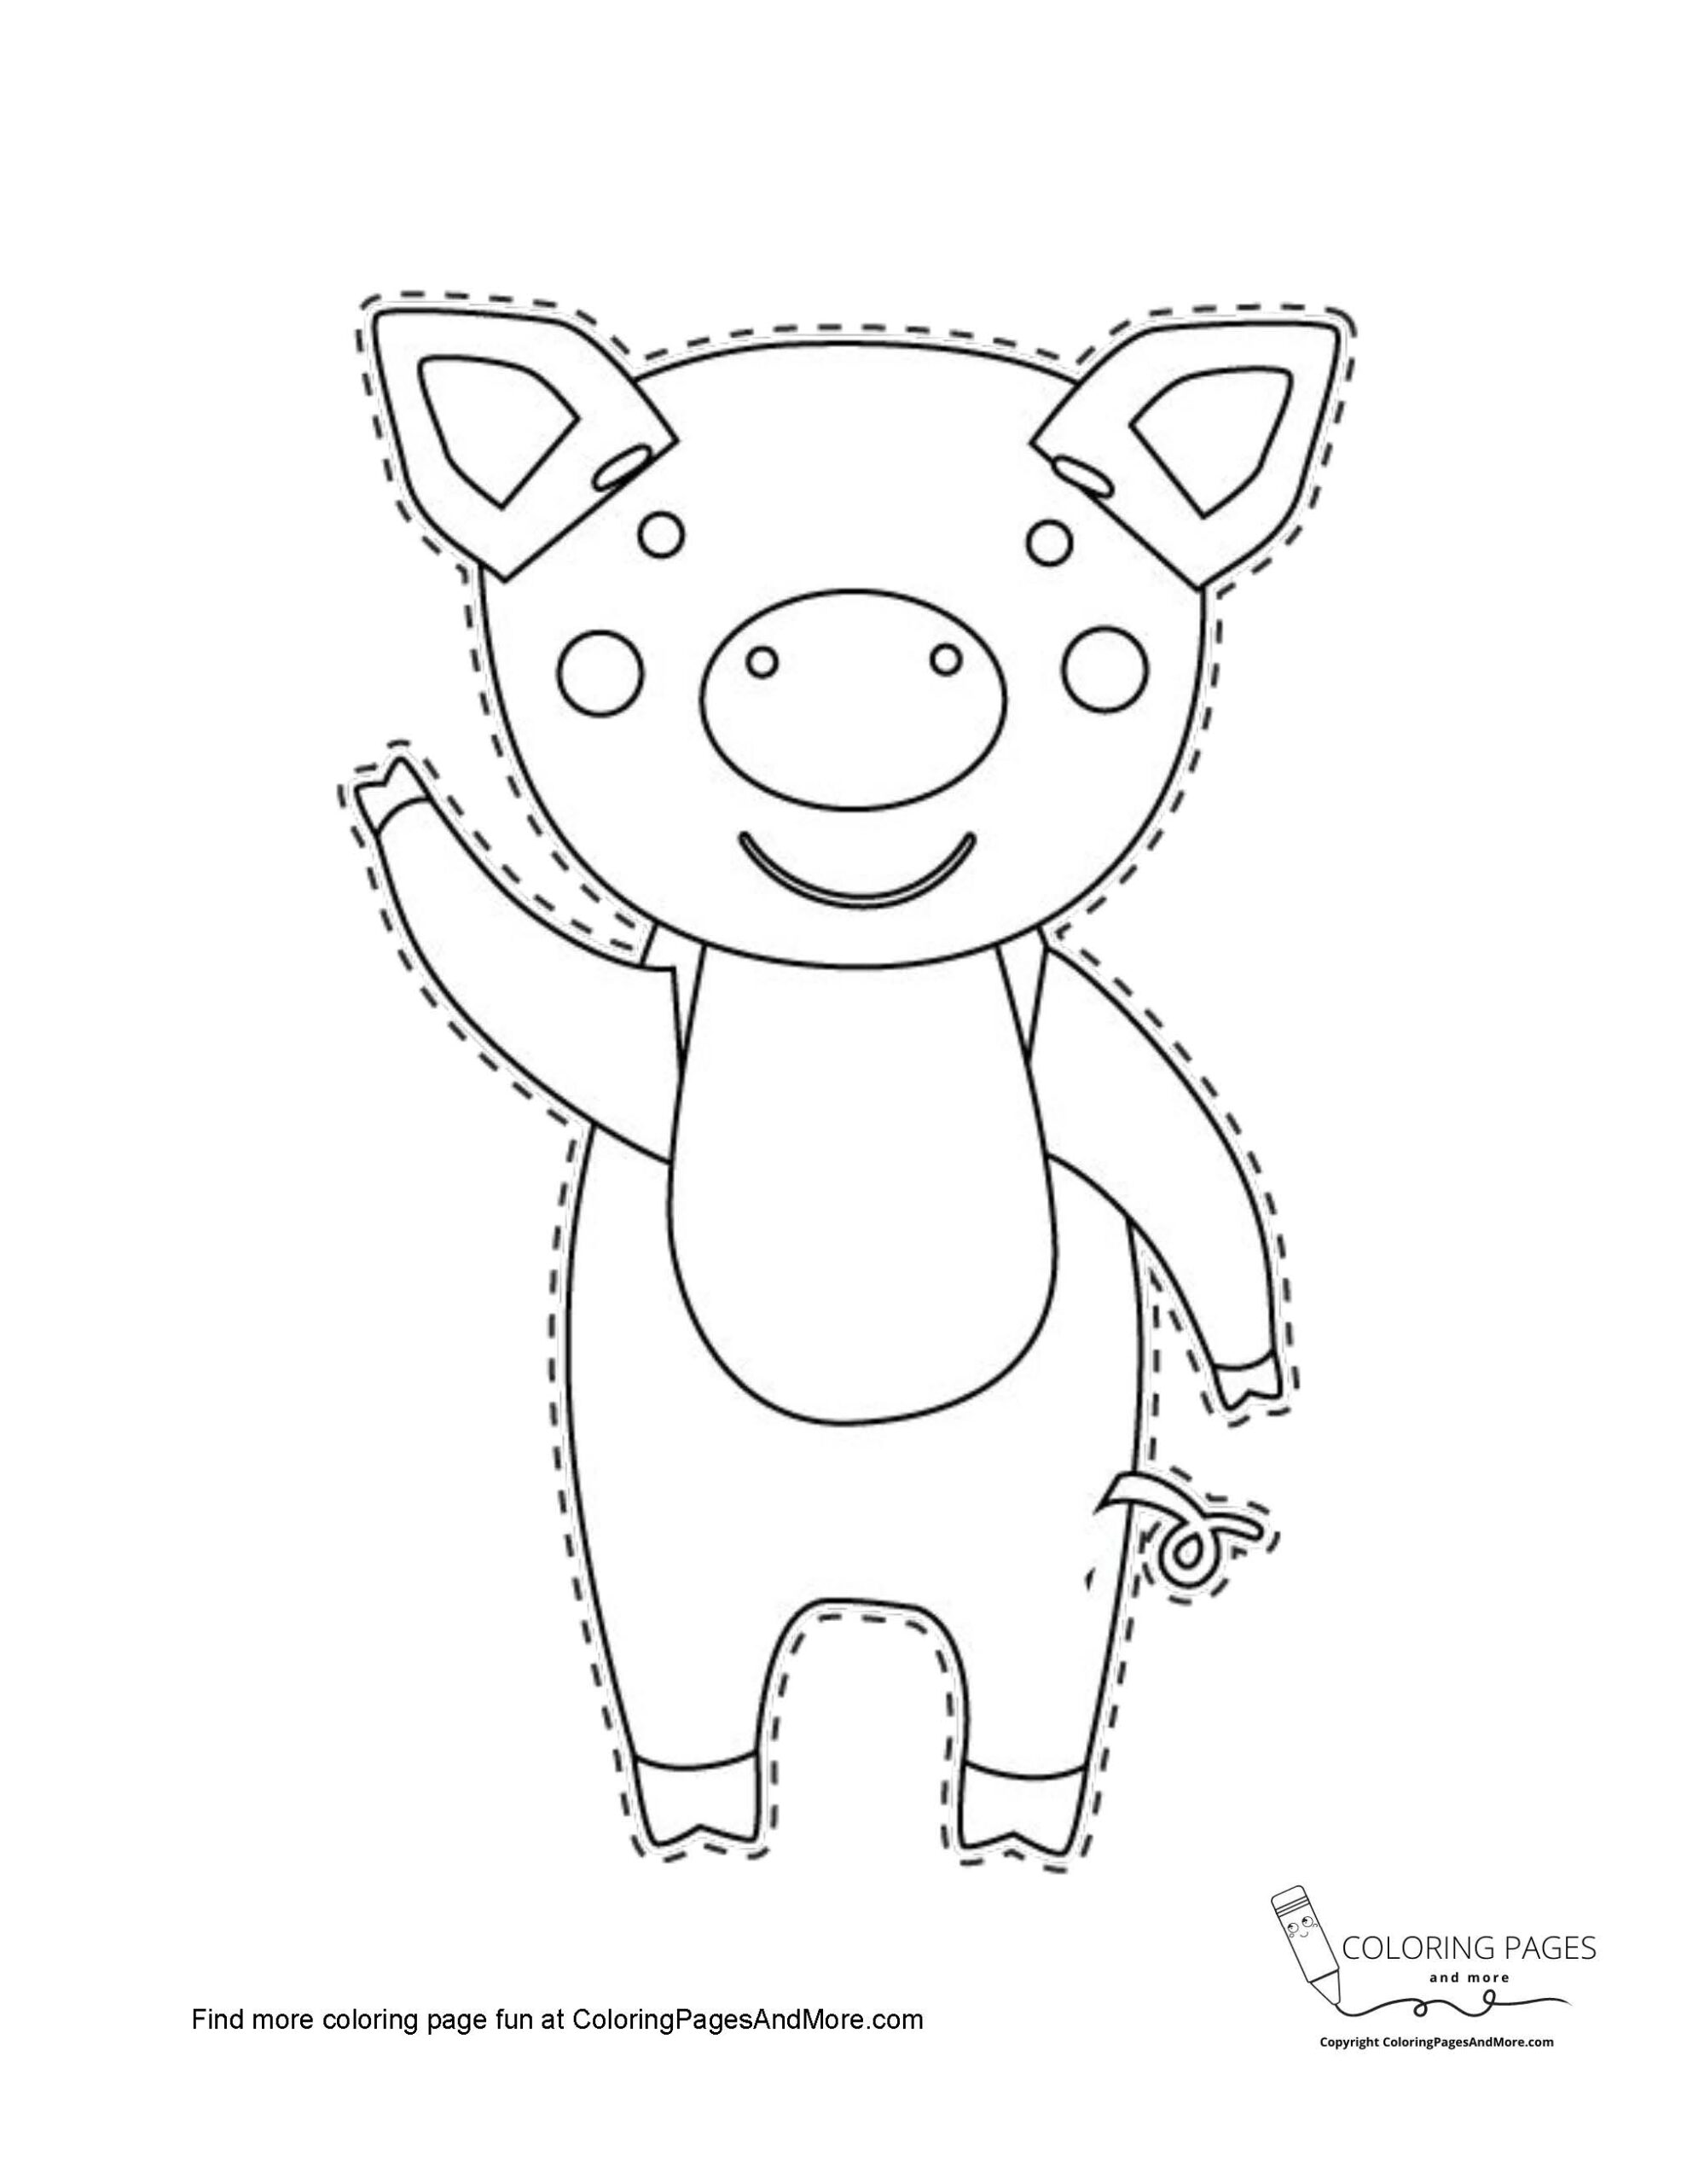 Piggy coloring and cutting page